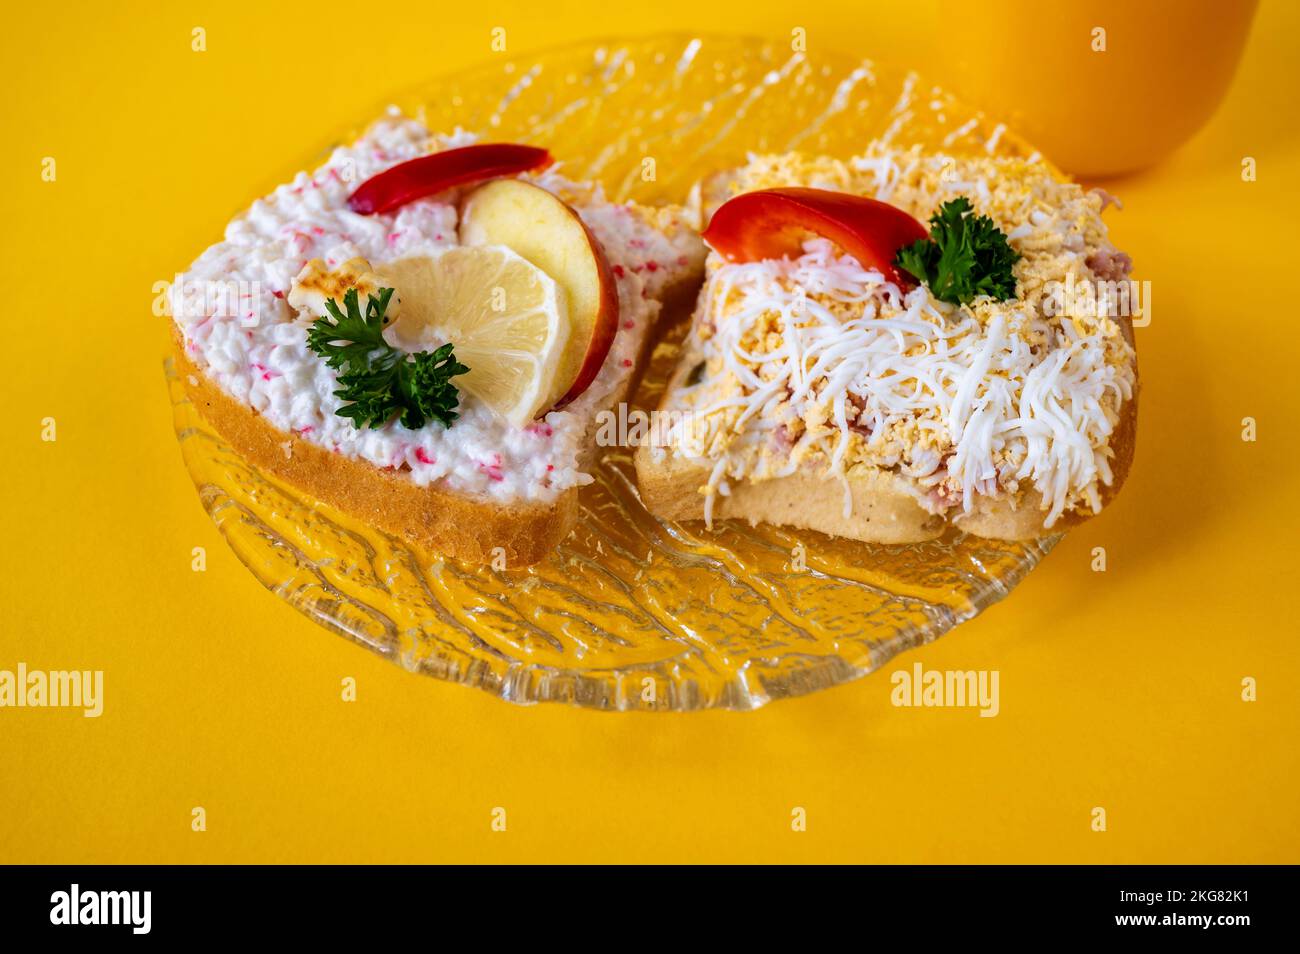 2 sandwiches on glass plate on yellow background. Right with spread with cheese, boiled egg, ham and apple, left with lobster spread, apple and lemon. Stock Photo